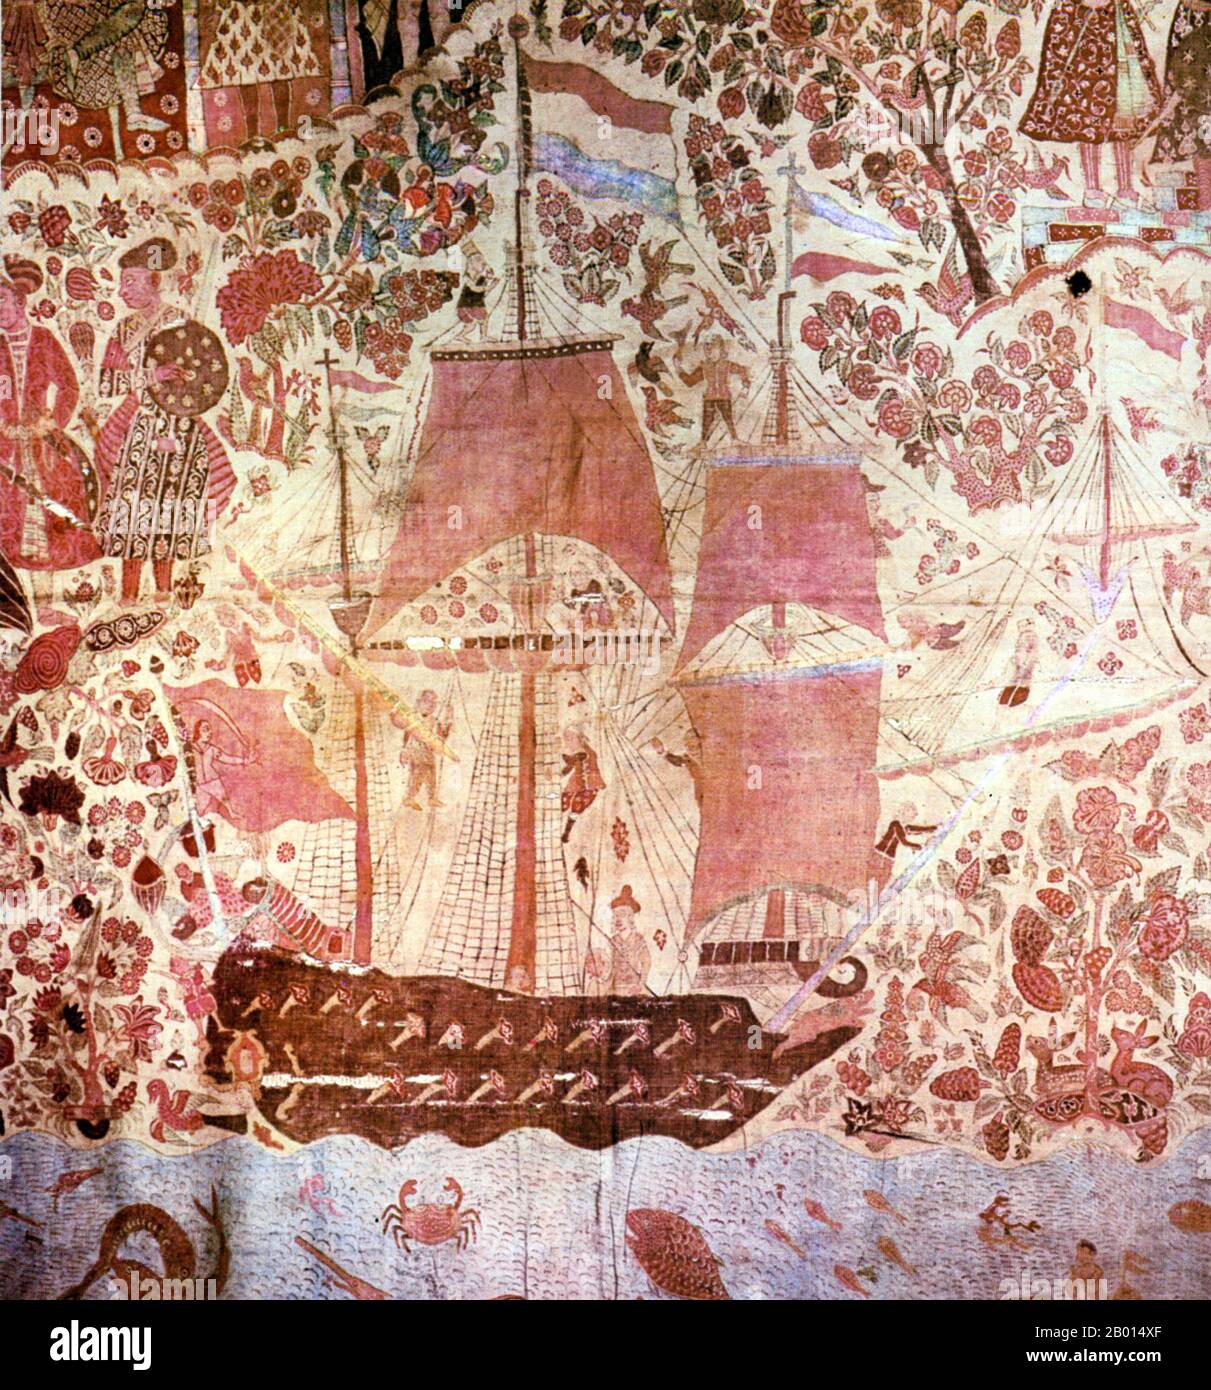 India: A Dutch ship off the coast of India in the 1600s, painted on Indian cloth.  The Dutch East India Company, or VOC, was a chartered company established in 1602, when the States-General of the Netherlands granted it a 21-year monopoly to carry out colonial activities in Asia. It was the first multinational corporation in the world and the first company to issue stock. It was also arguably the world's first megacorporation, possessing quasi-governmental powers, including the ability to wage war, imprison and execute convicts, negotiate treaties, coin money and establish colonies. Stock Photo